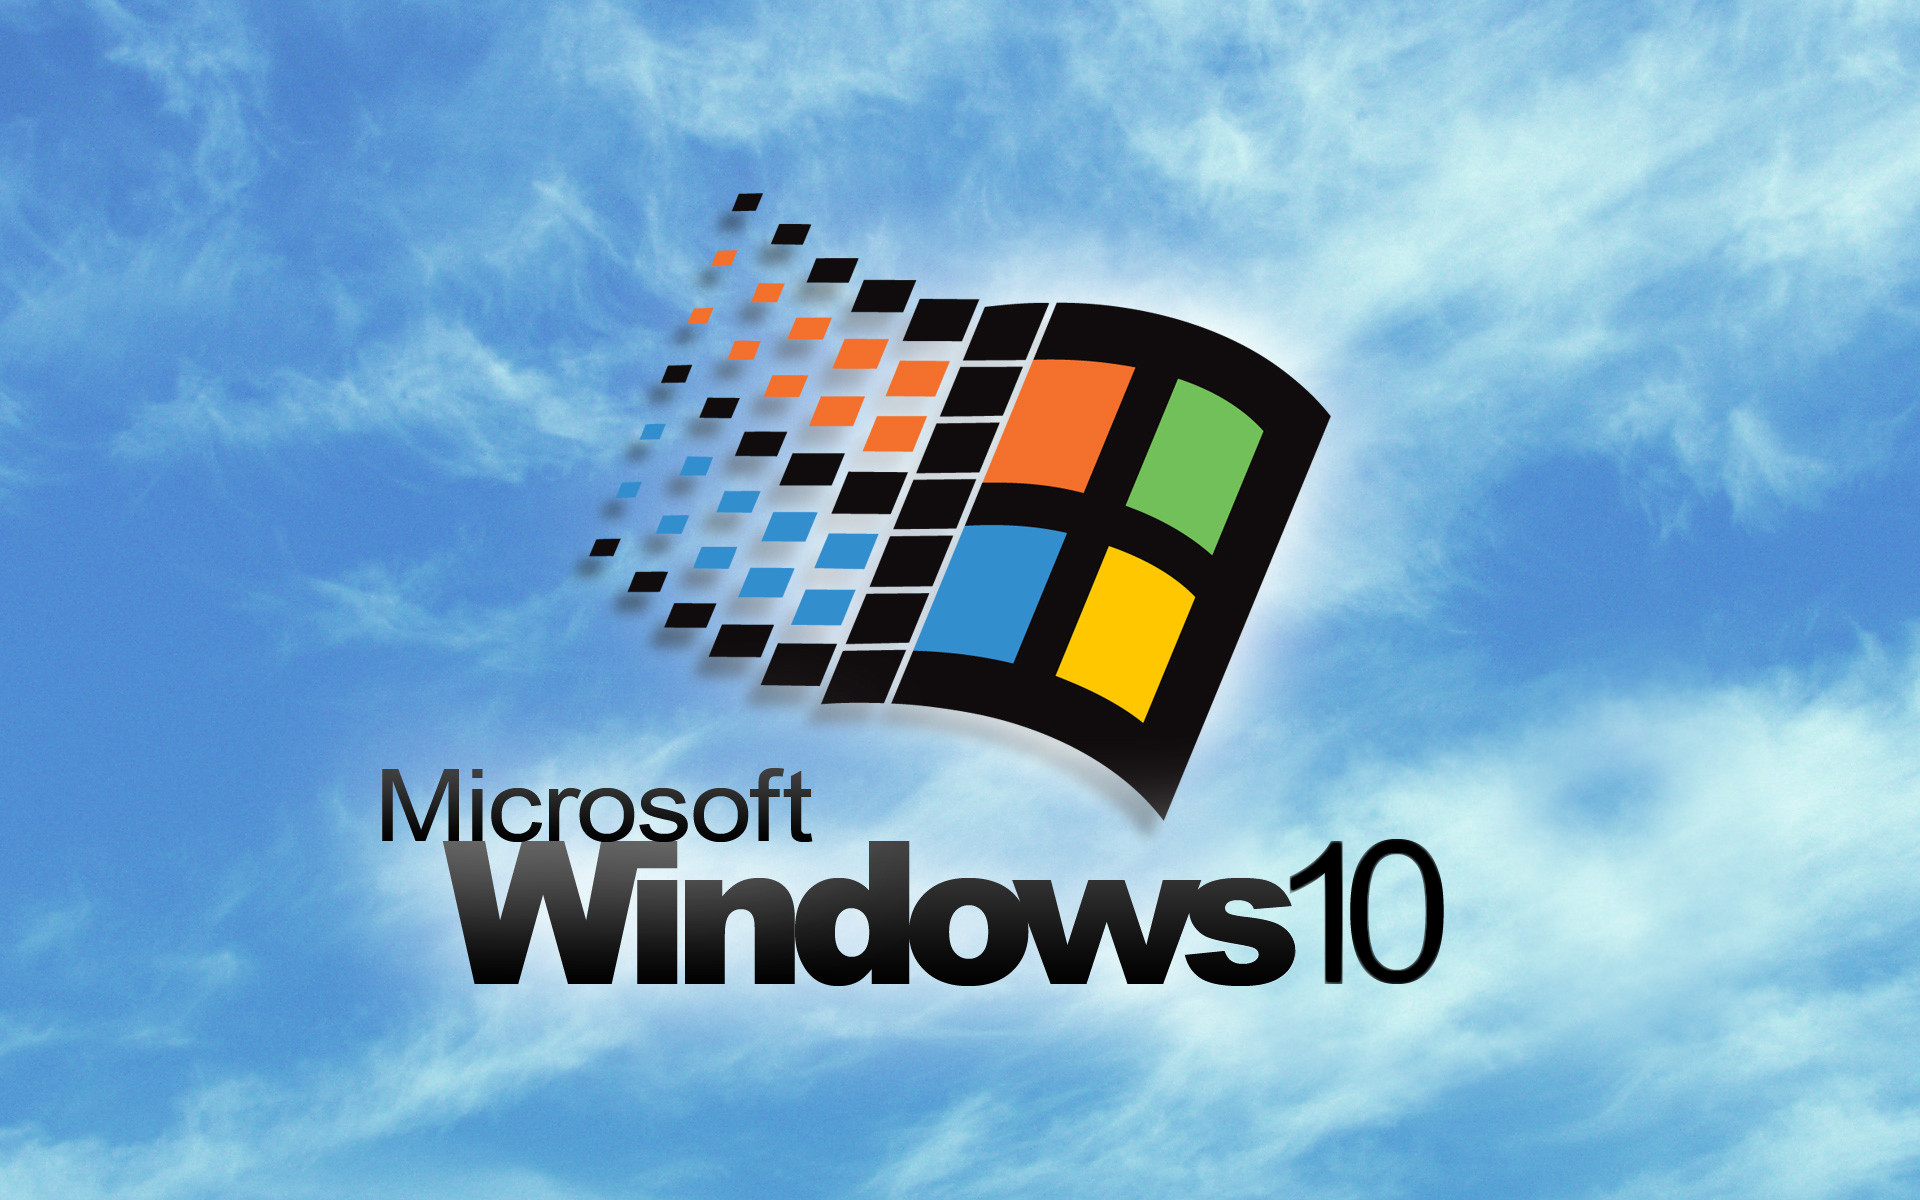 I edited a Windows 98 wallpaper to be a bit more relevant. Hope